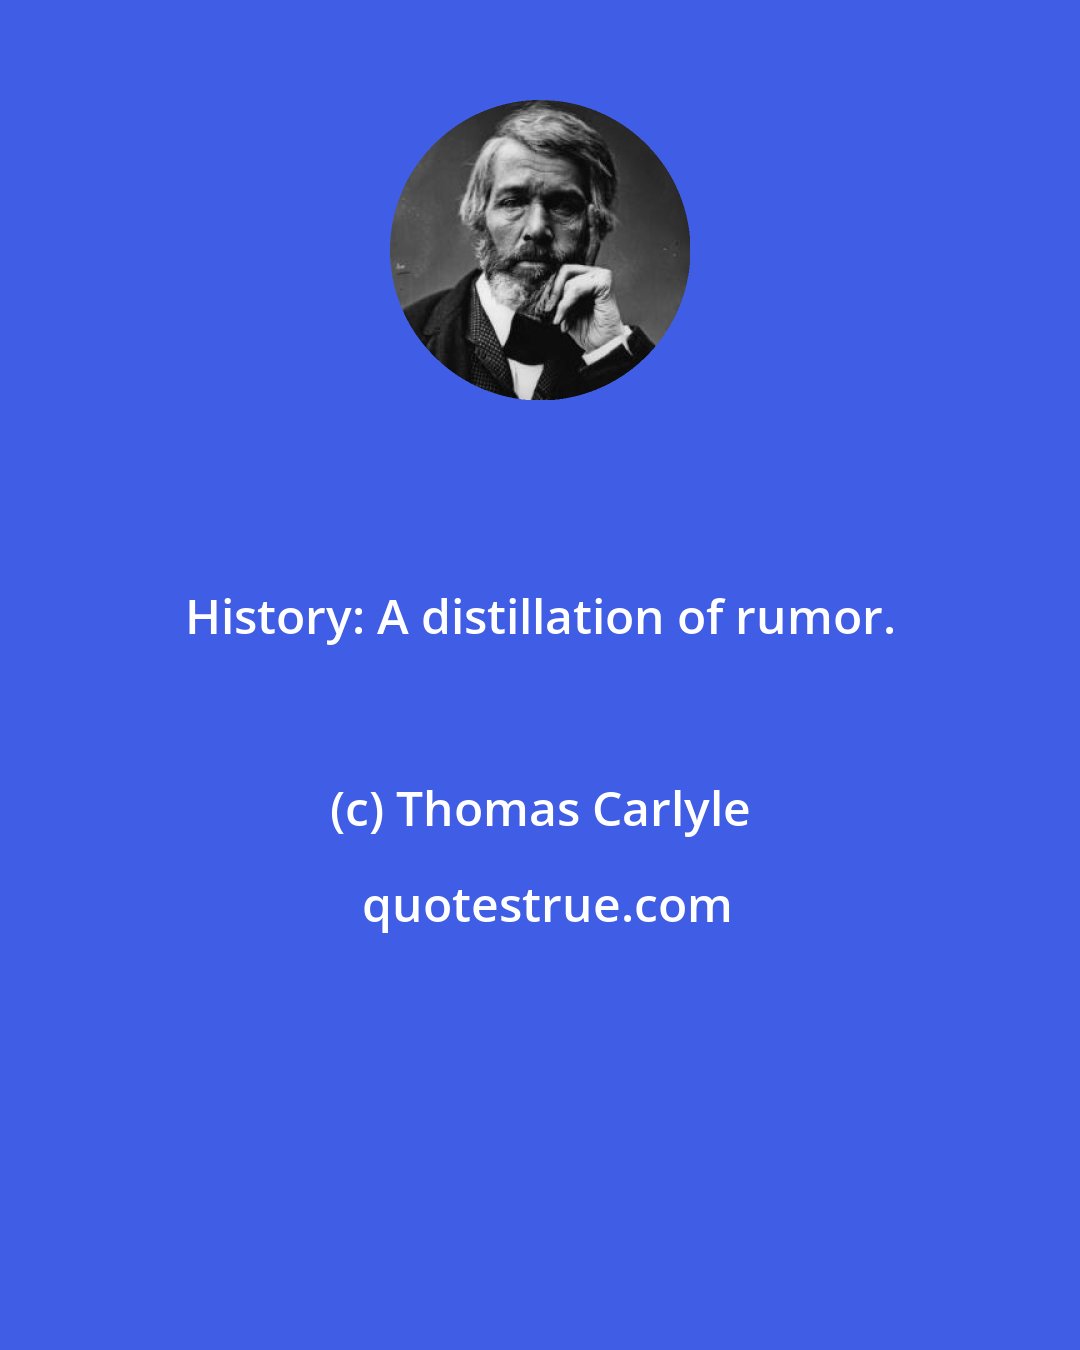 Thomas Carlyle: History: A distillation of rumor.